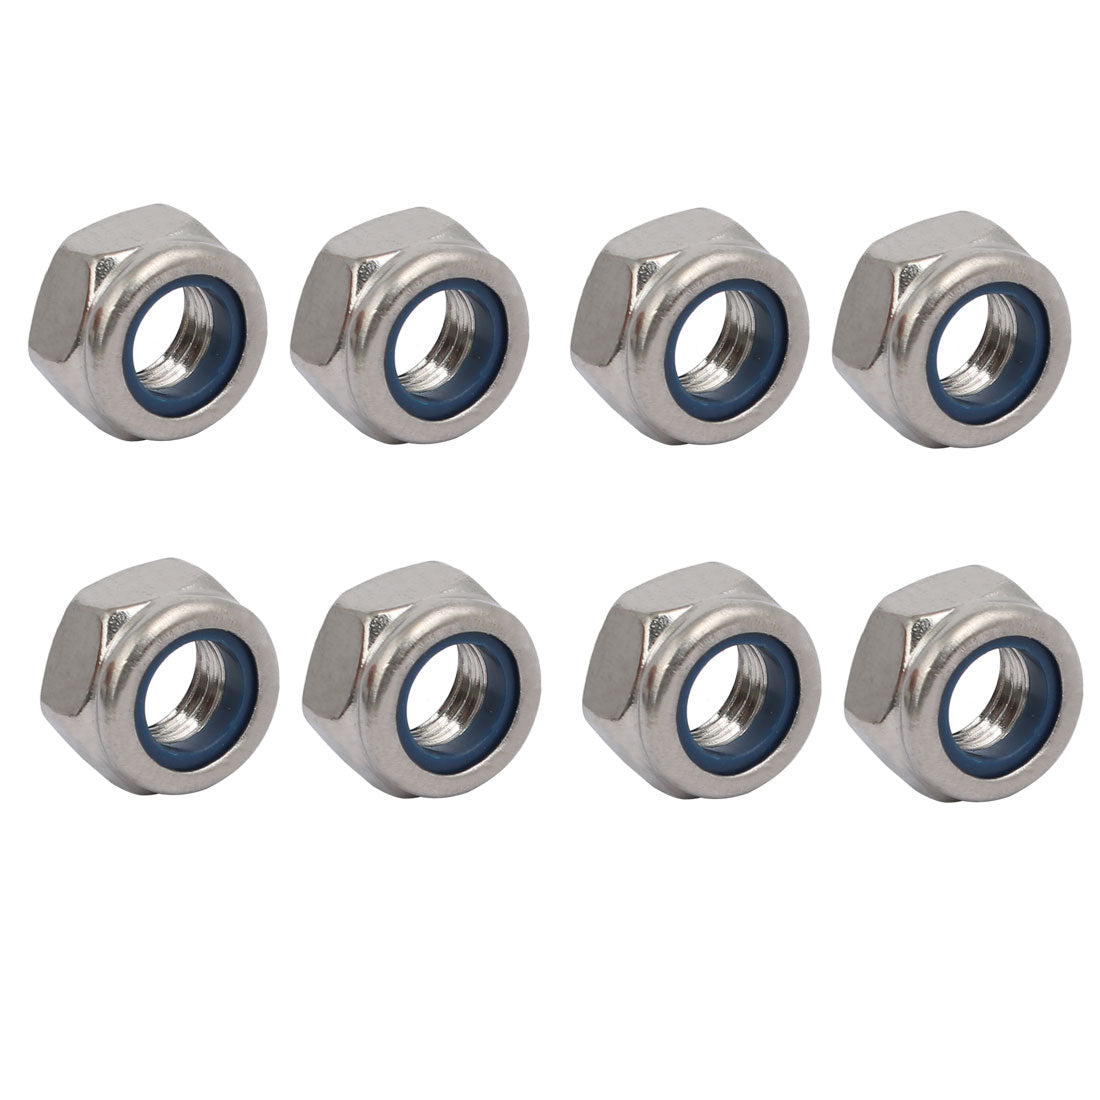 uxcell Uxcell 8pcs M8 x 1.25mm Pitch Metric Thread 304 Stainless Steel Left Hand Lock Nuts